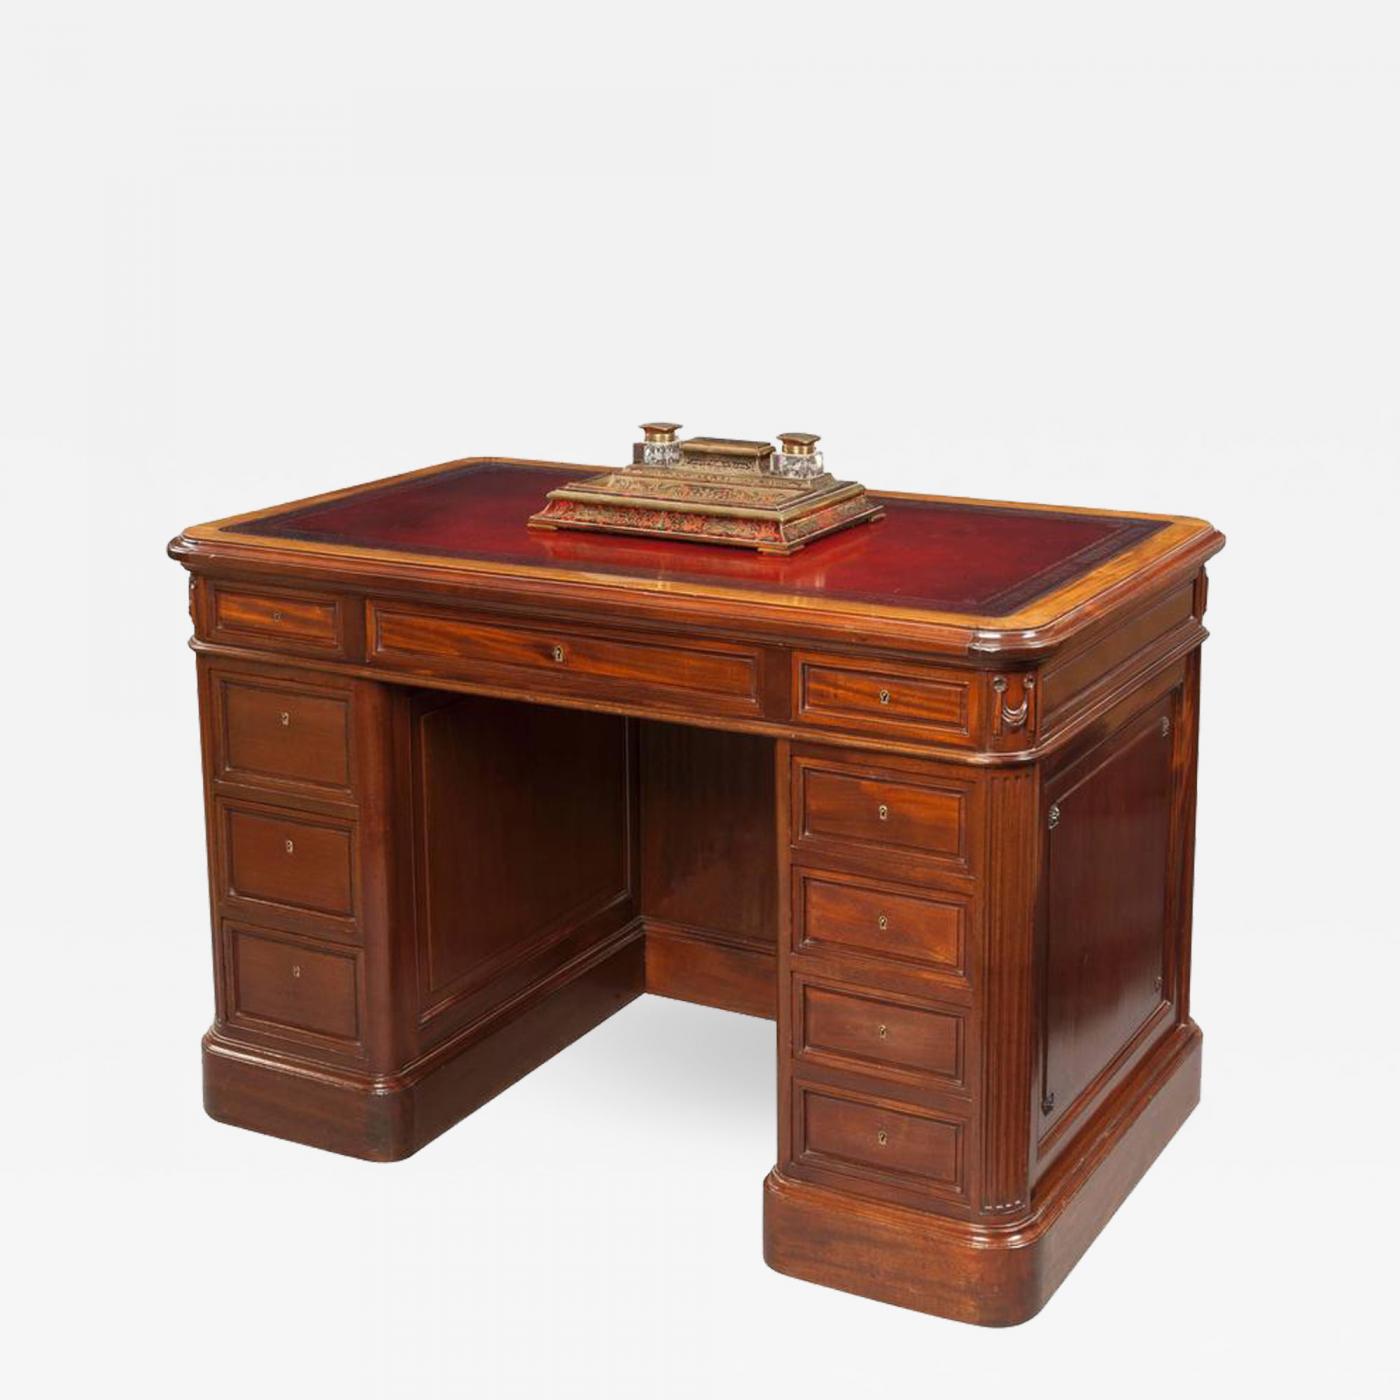 Small French Mahogany Library Desk In The Neoclassical Style